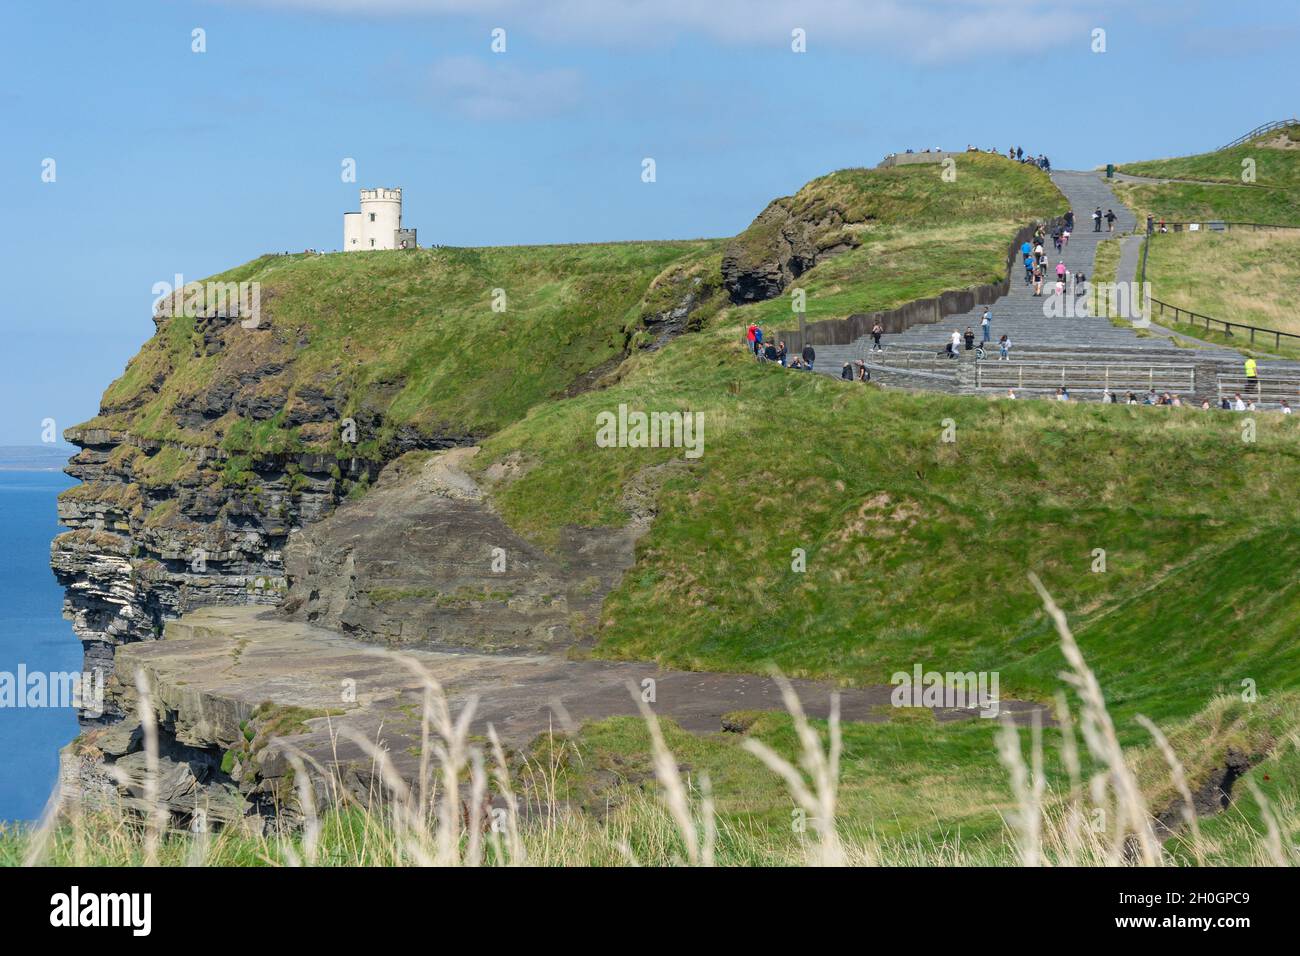 O'Brian's Tower, Cliffs of Moher (Aillte an Mhothair), Lahinch, County Clare, Republik Irland Stockfoto